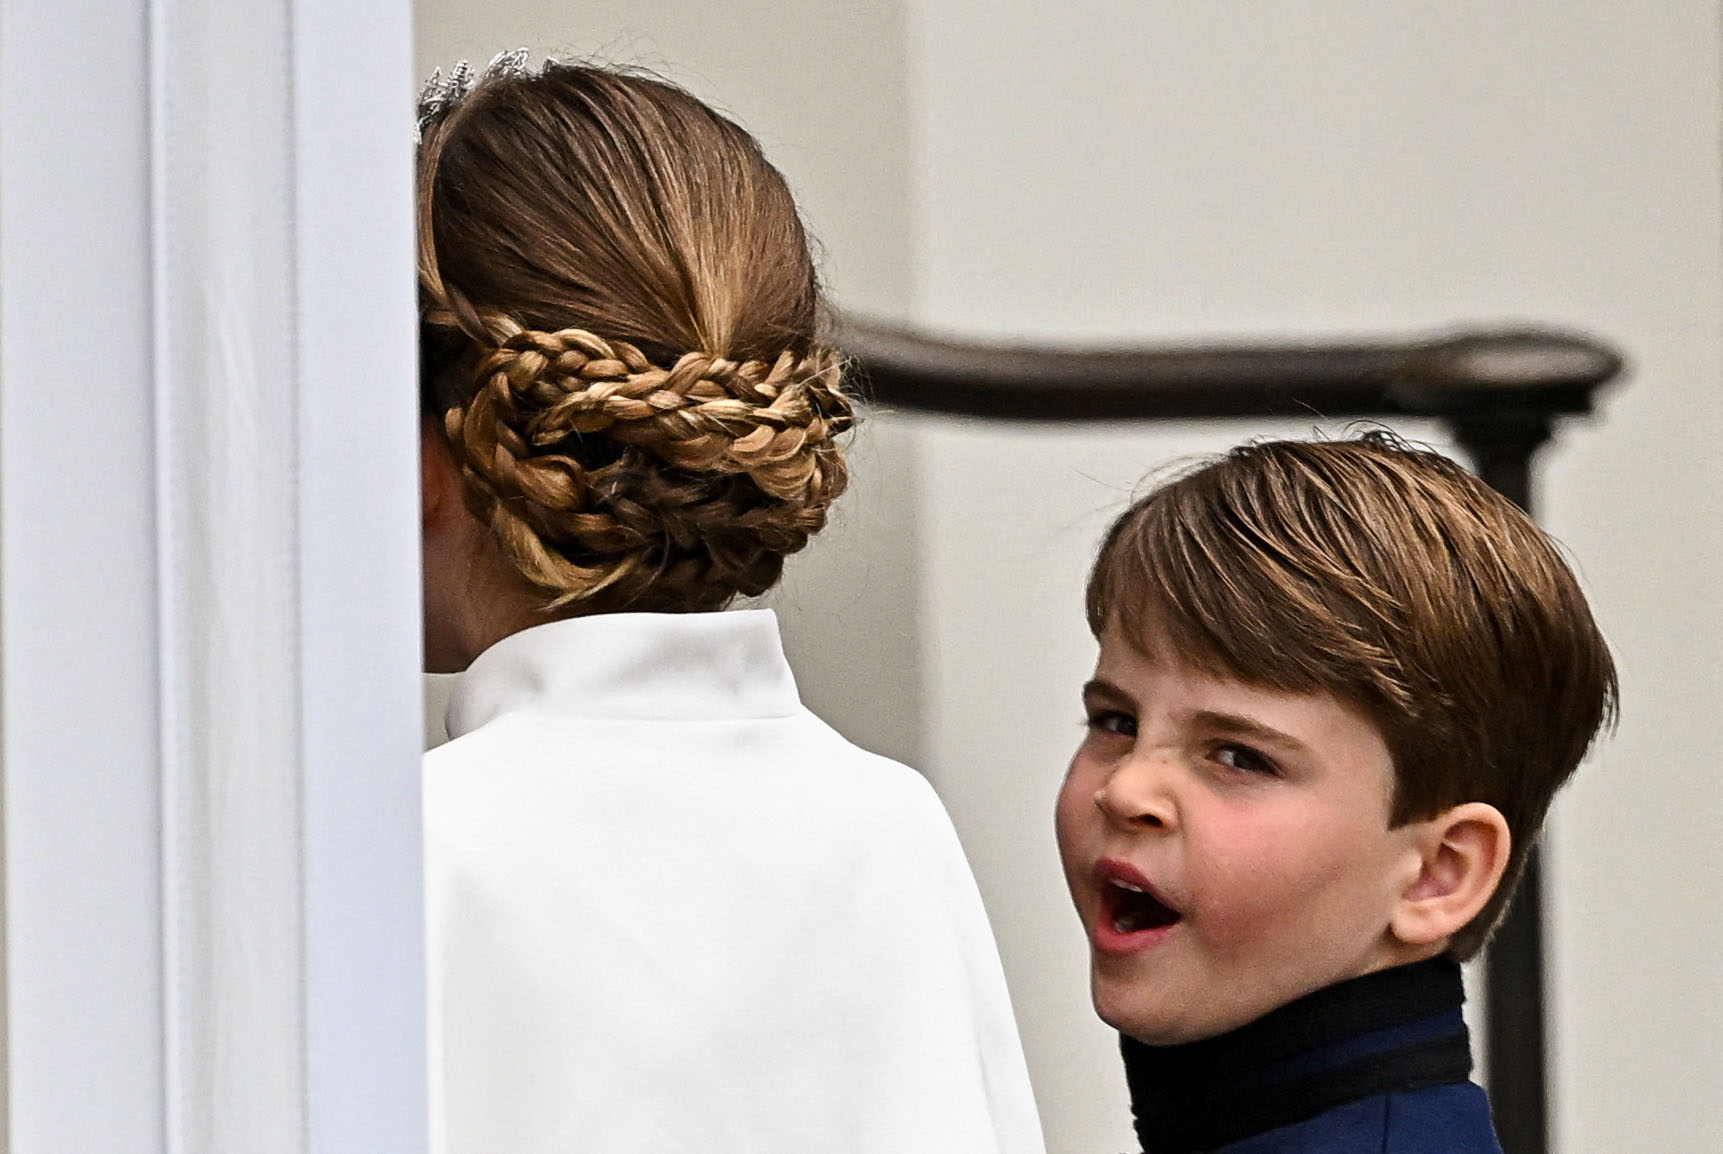 Prince Louis steals the show dancing, yawning at King Charles ...